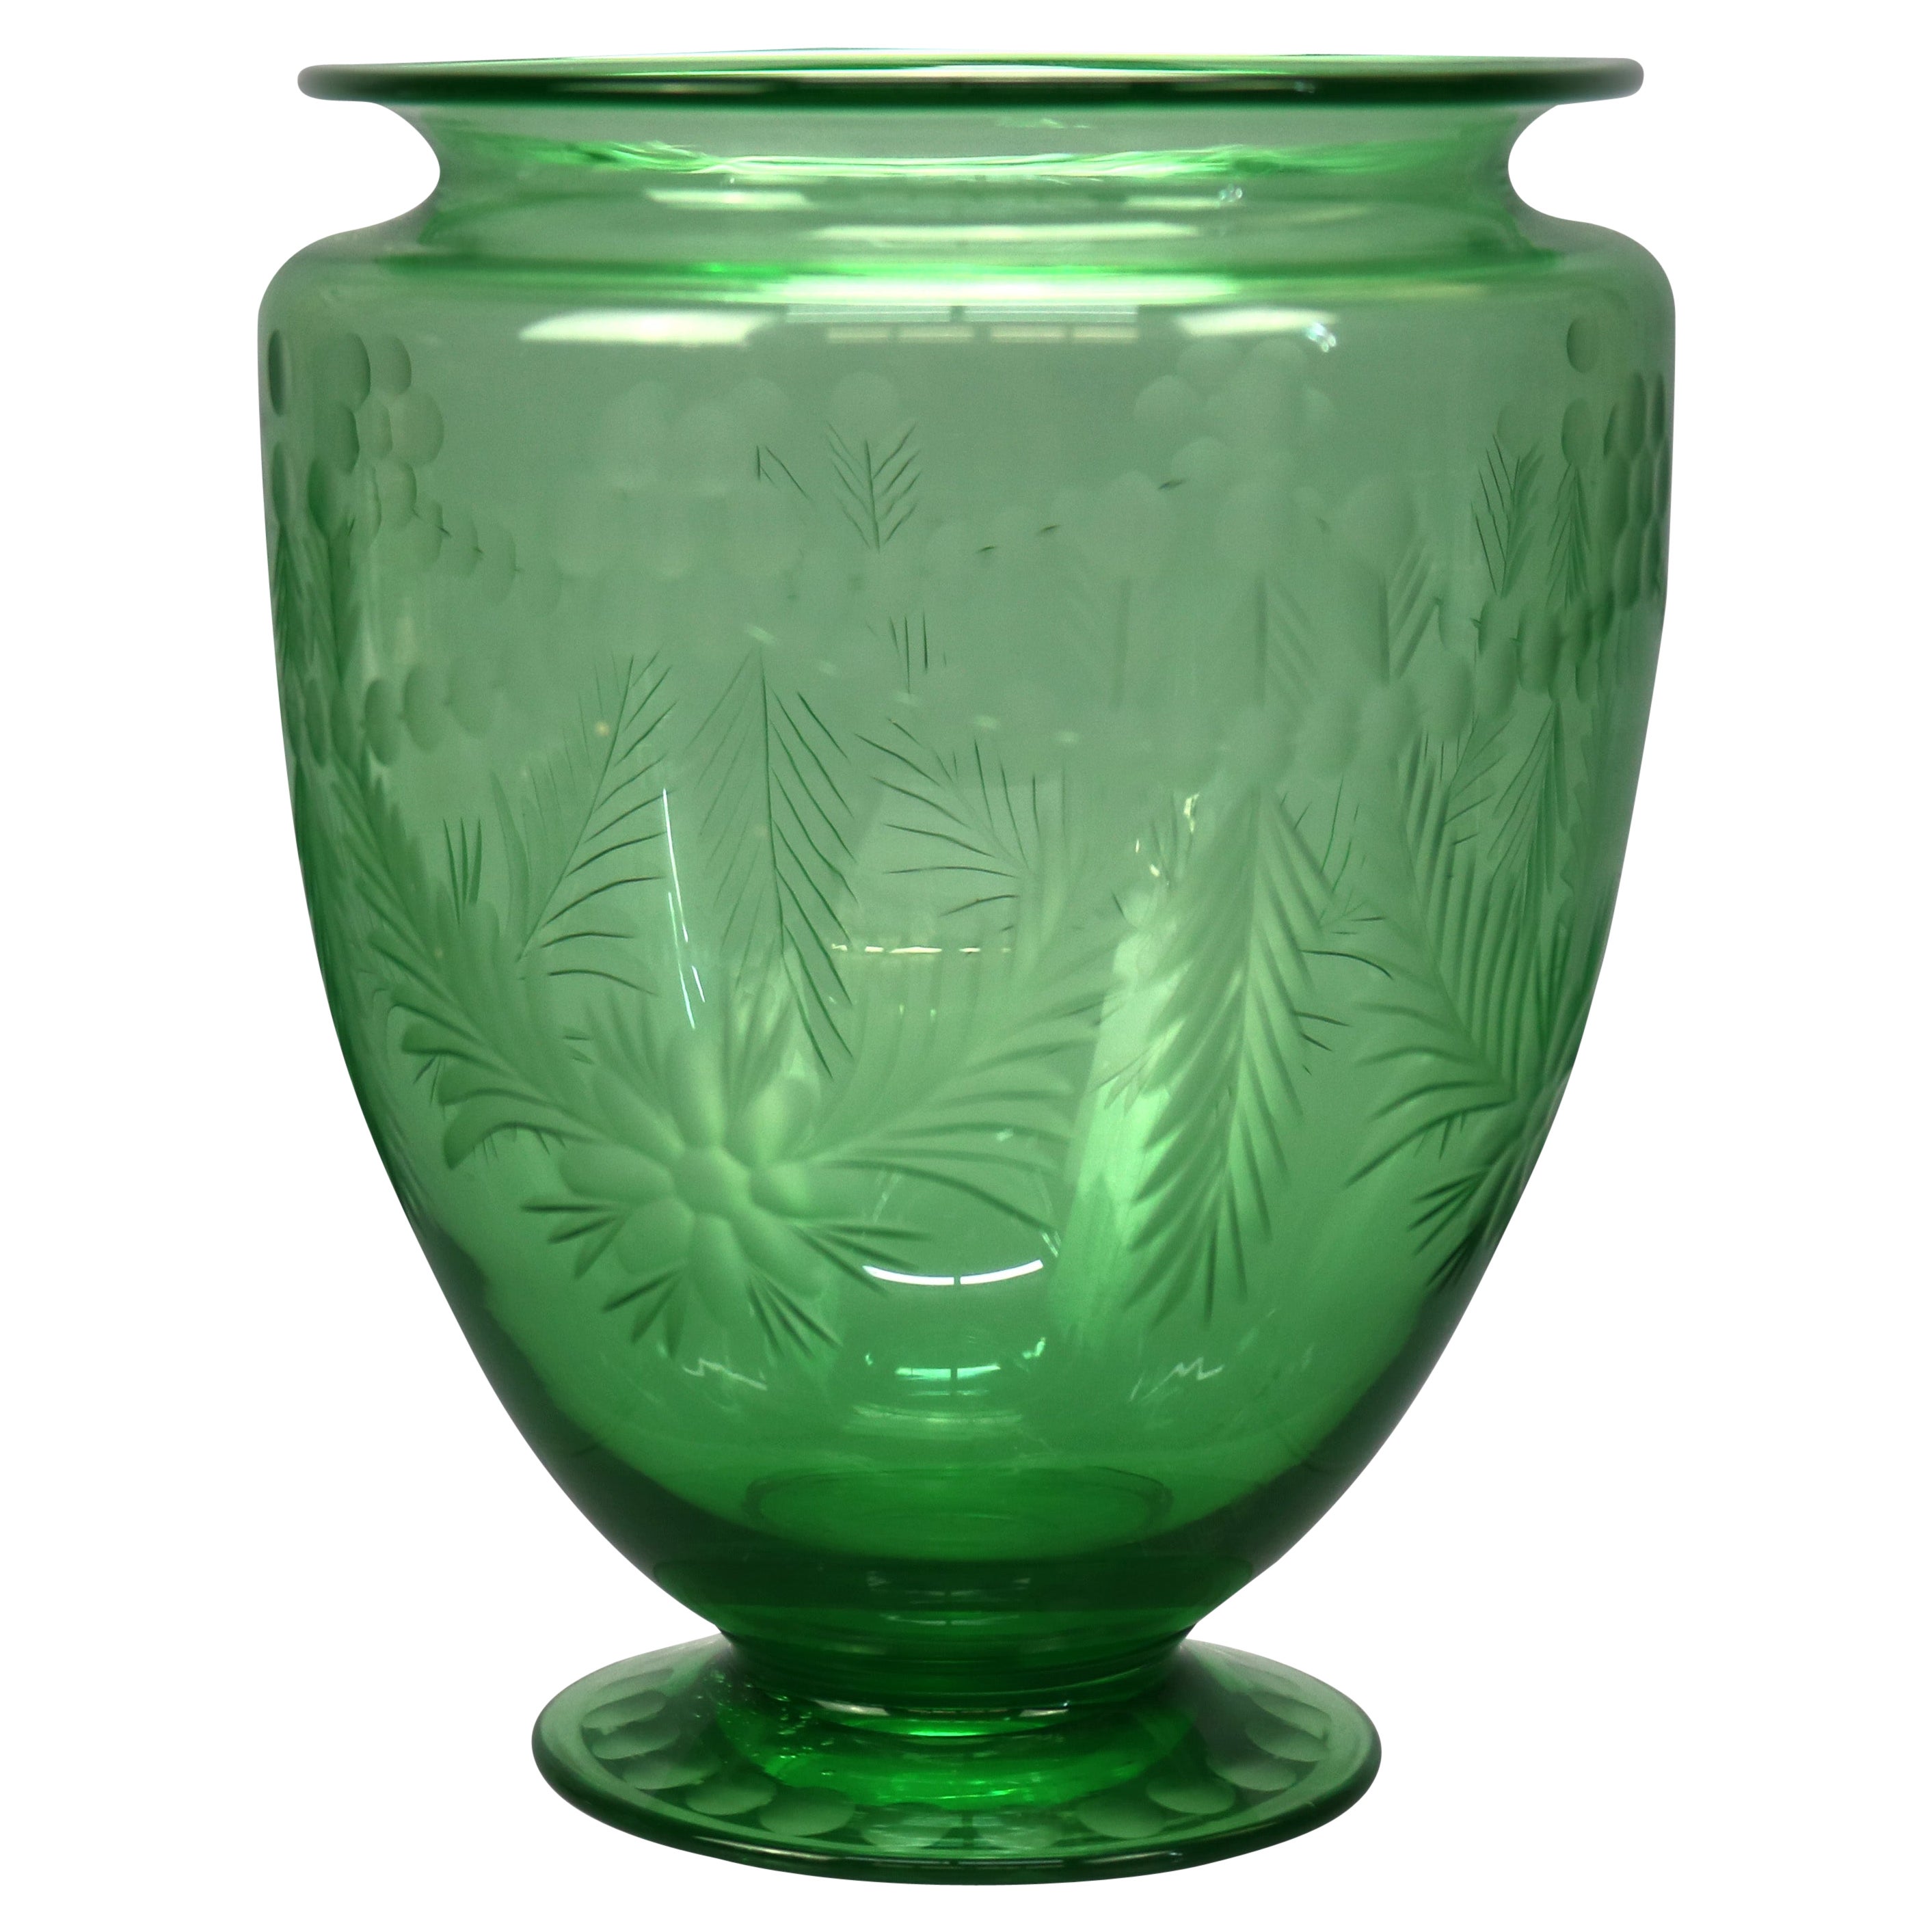 Antique Hawkes or Sinclaire Acid Etched Green Glass Vase, Circa 1930